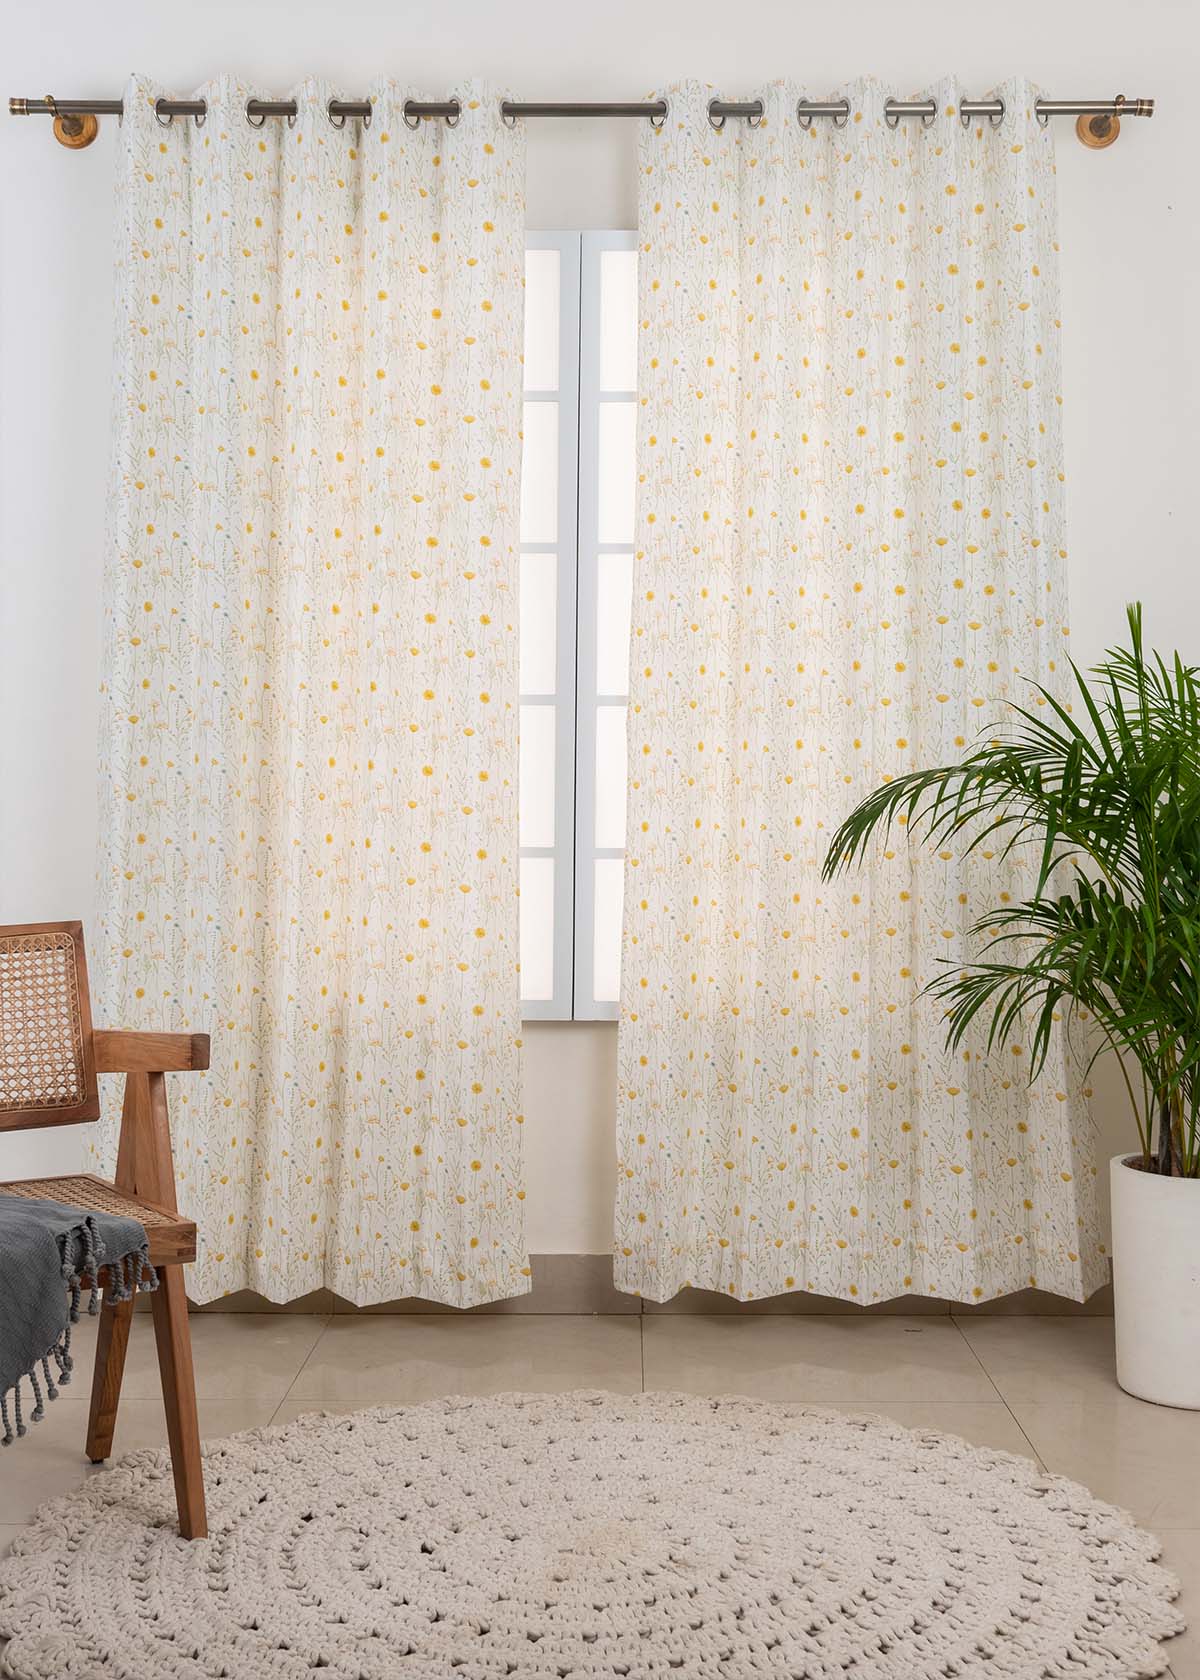 Drifting Dandelion 100% Customizable Cotton floral curtain for kids room, living room - Room darkening - Yellow